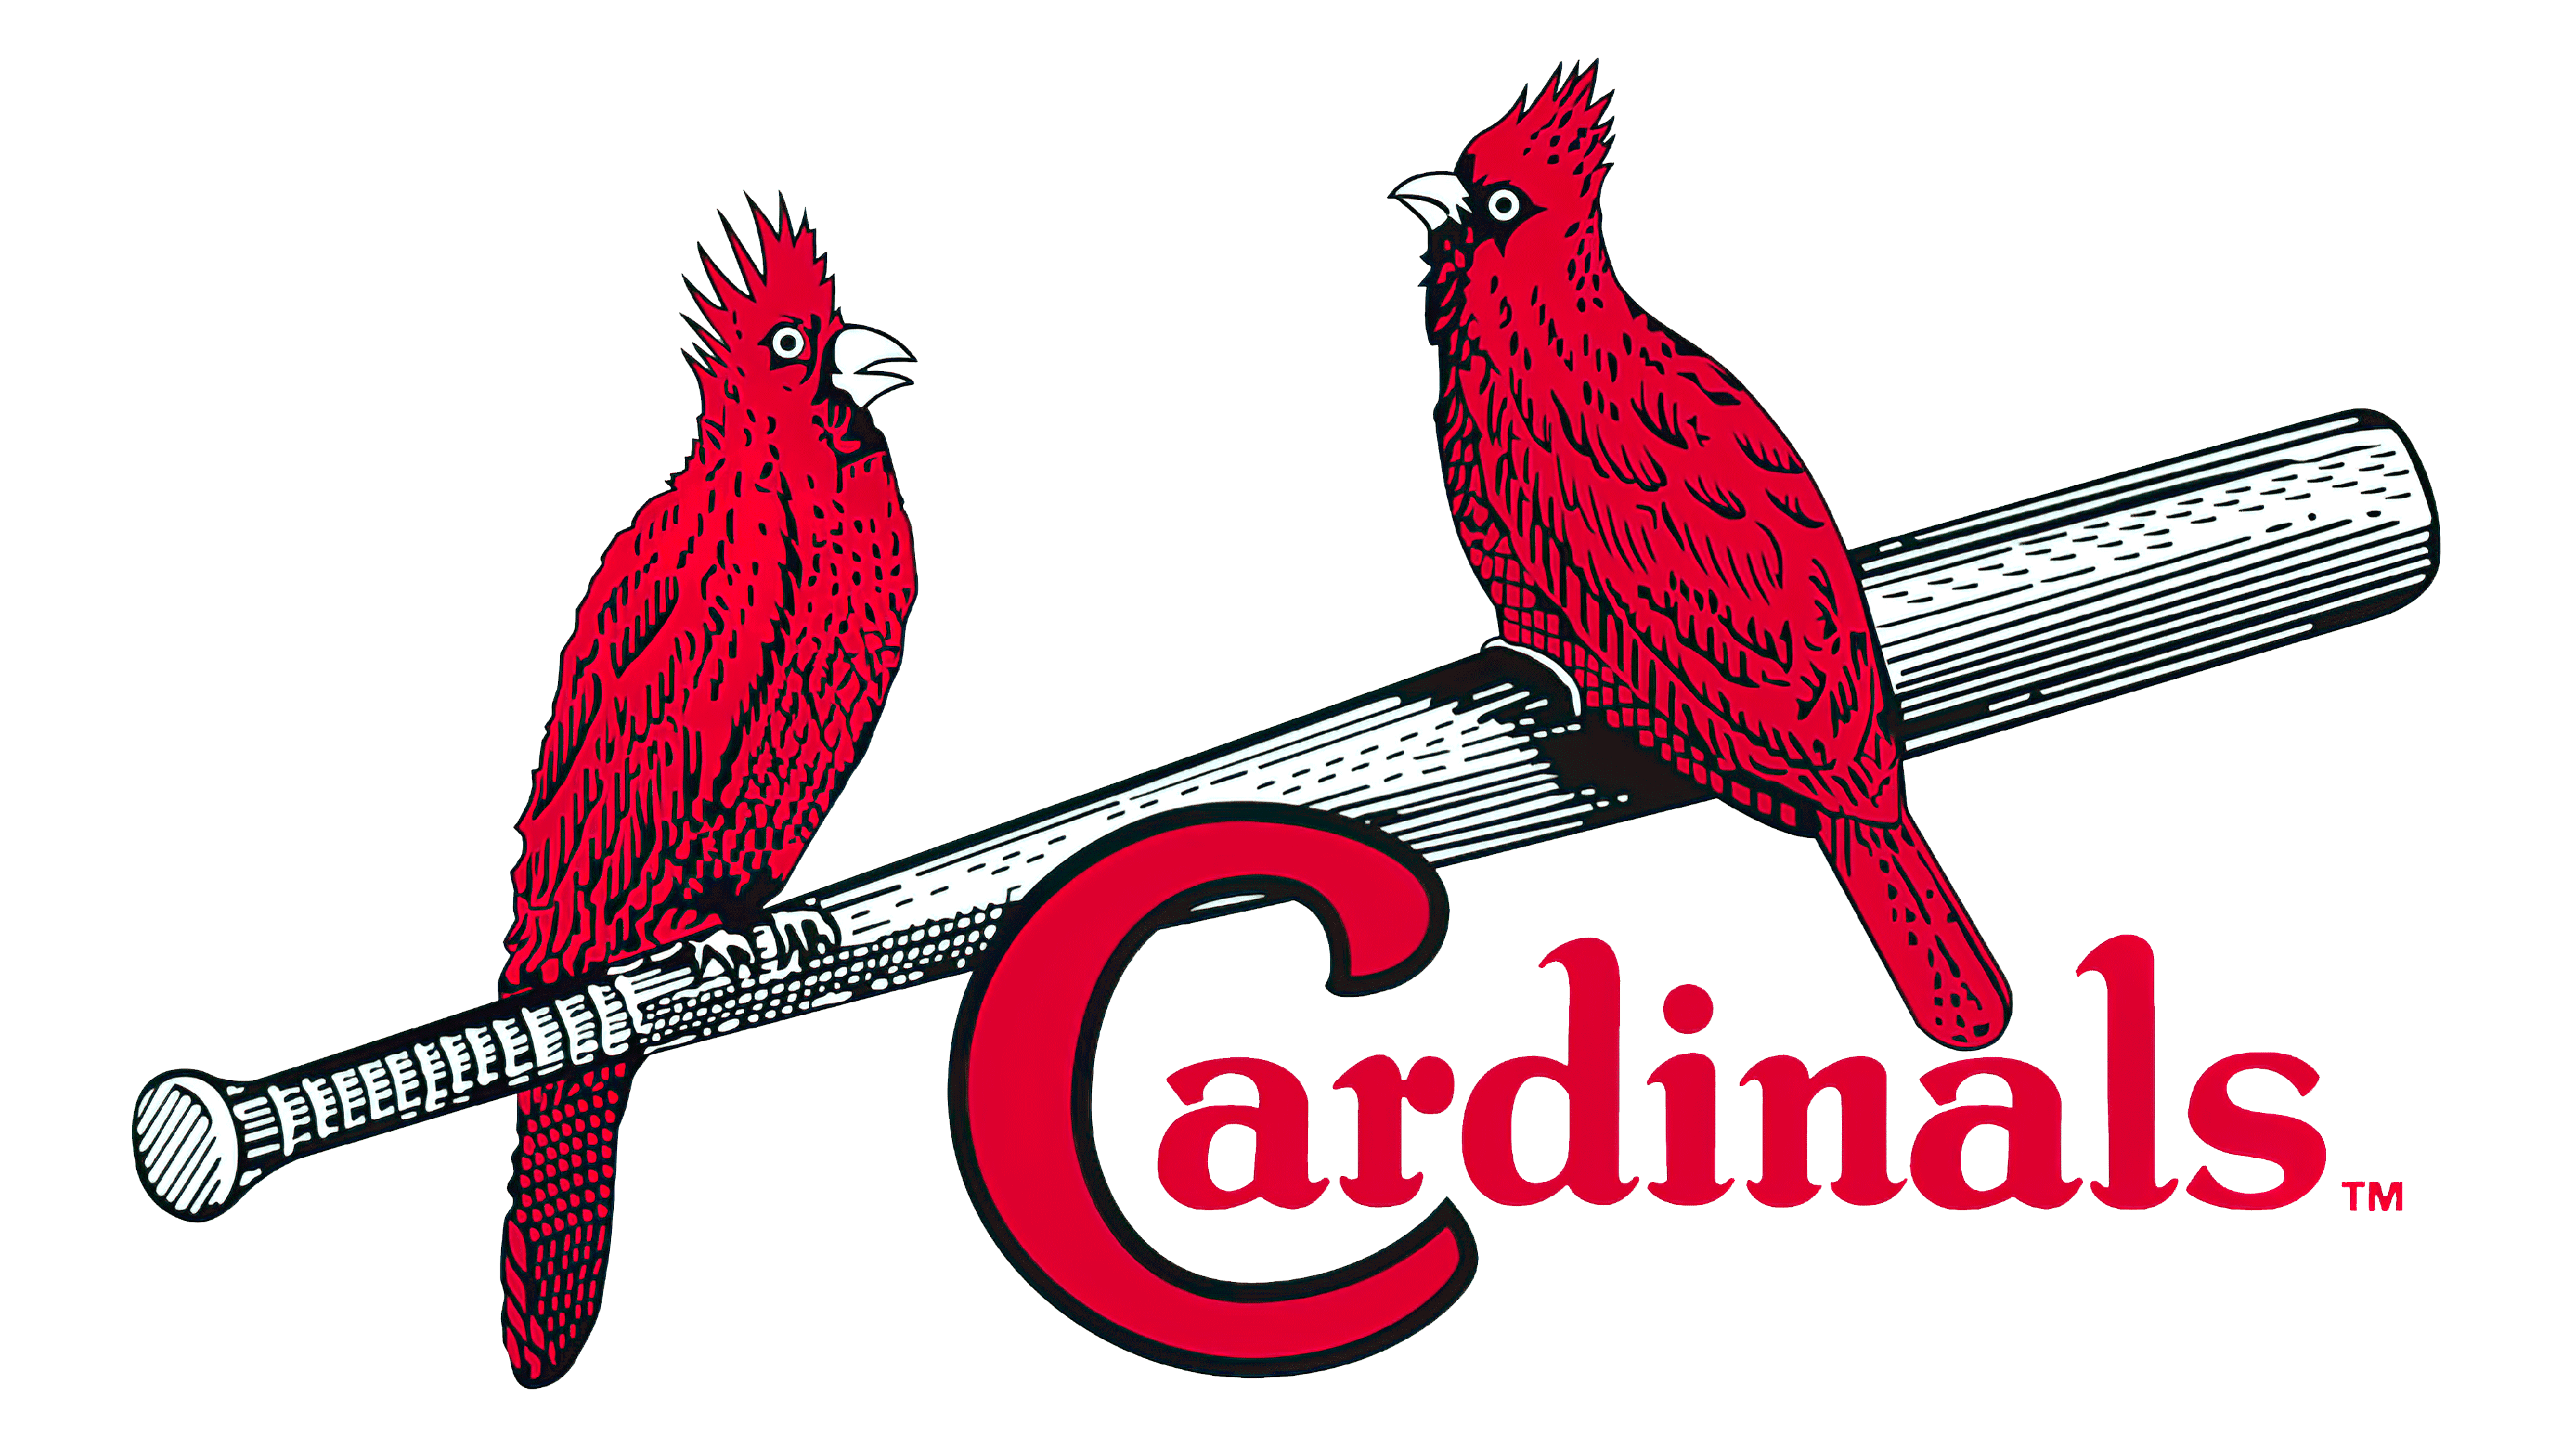 St. Louis Cardinals Logo and sign, new logo meaning and history, PNG, SVG